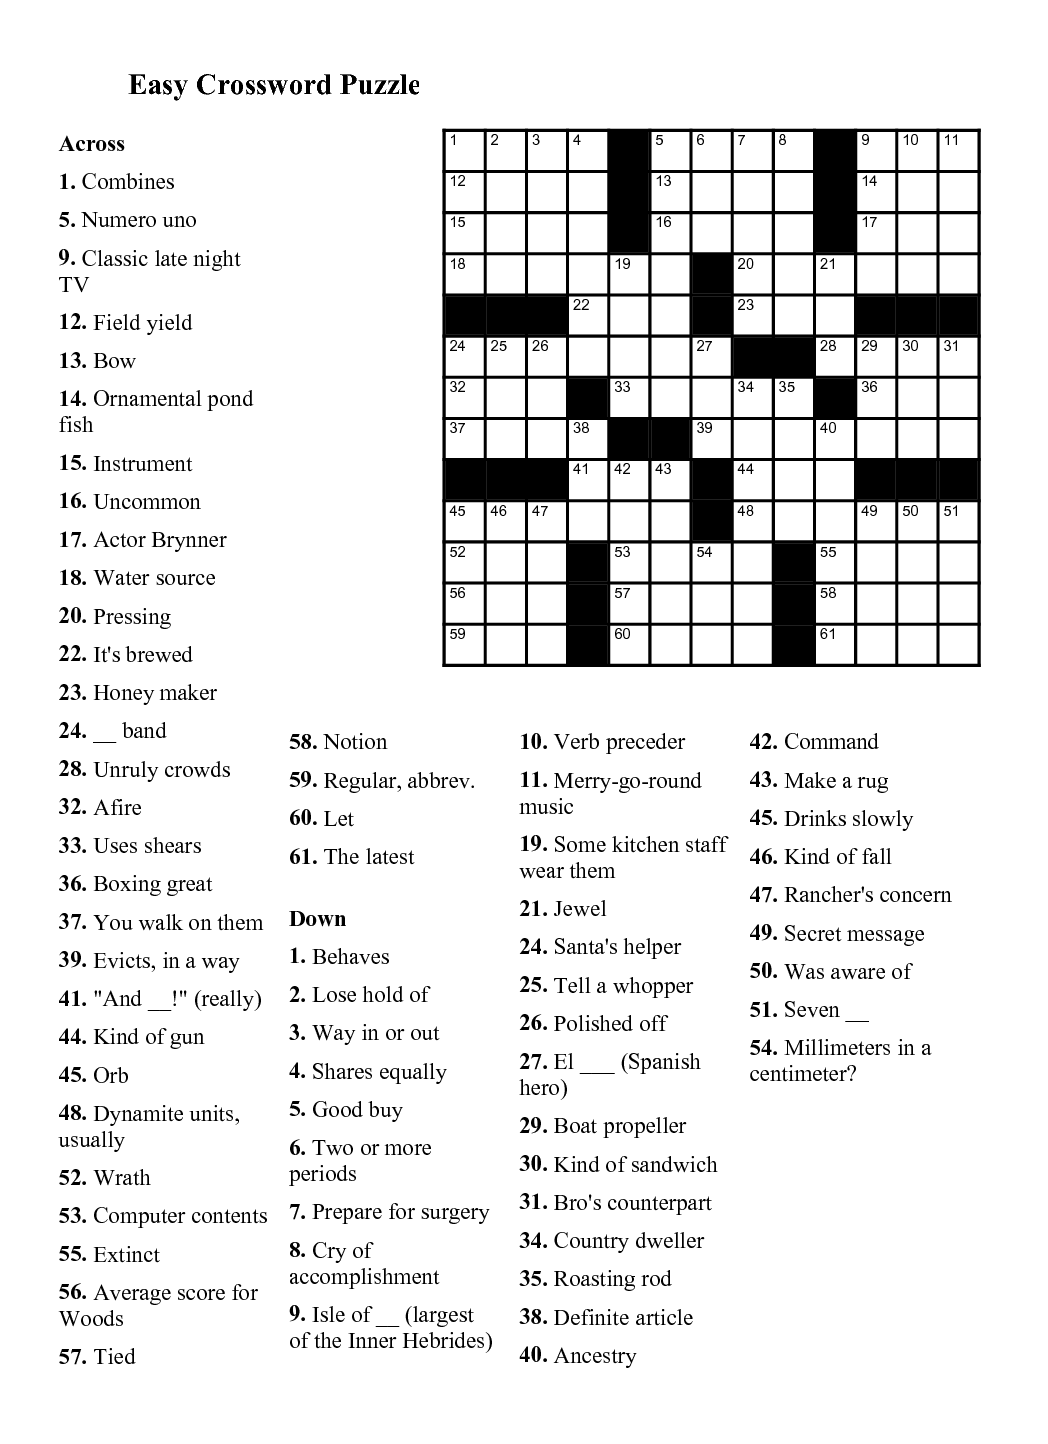 Easy Crossword Puzzles Printable Daily Template - Easy Crossword Puzzles Printable Daily